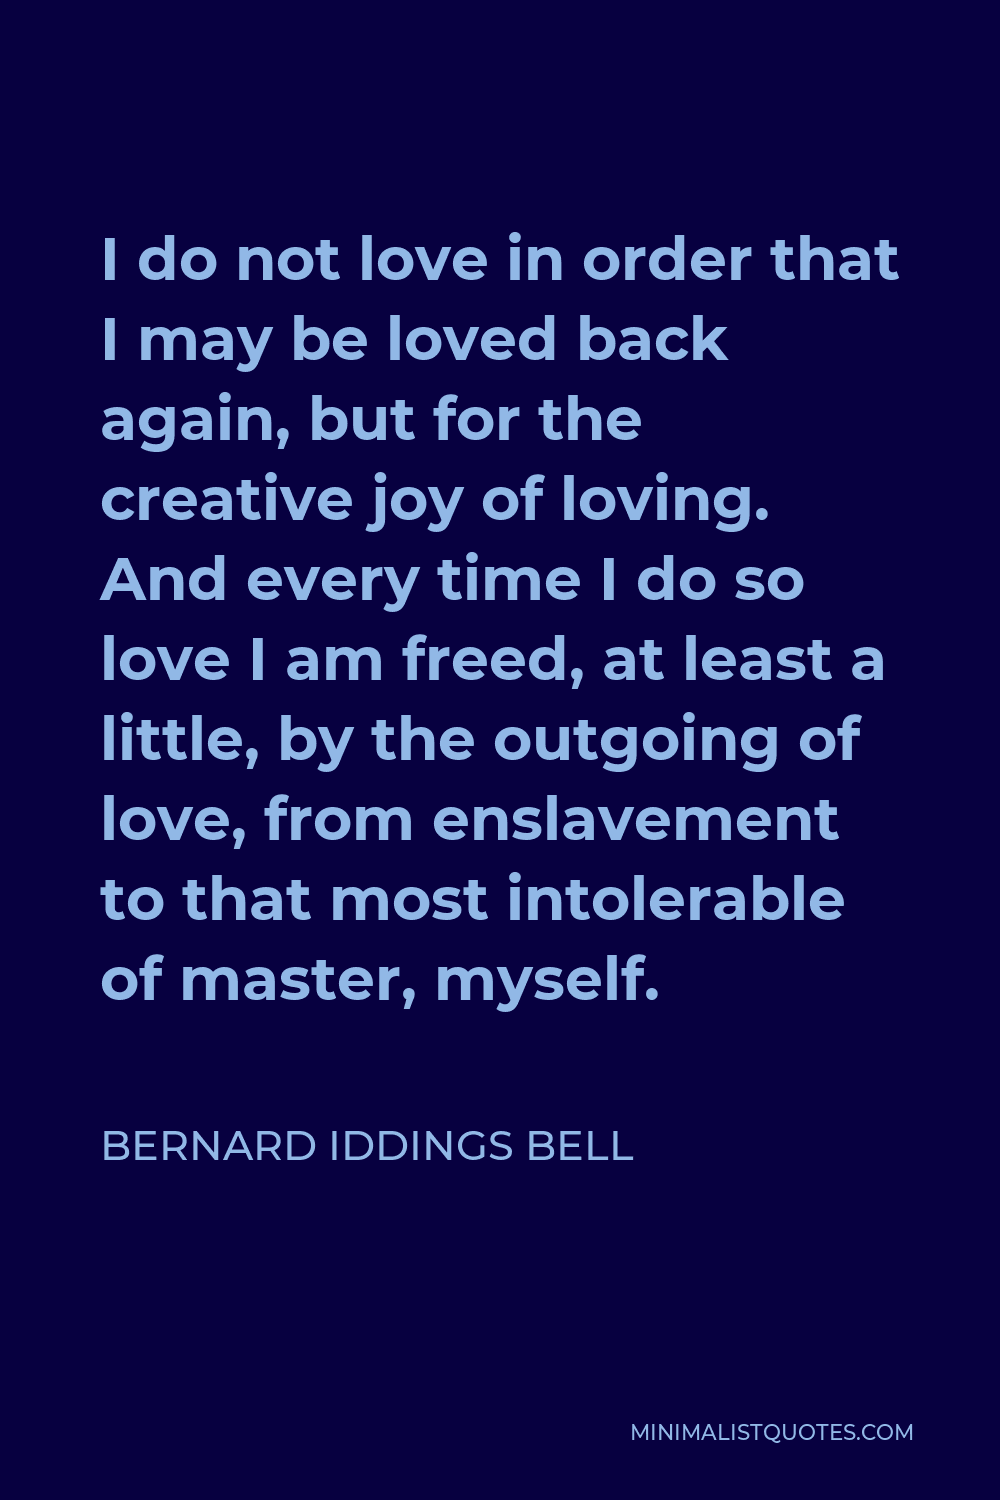 Bernard Iddings Bell Quote - I do not love in order that I may be loved back again, but for the creative joy of loving. And every time I do so love I am freed, at least a little, by the outgoing of love, from enslavement to that most intolerable of master, myself.